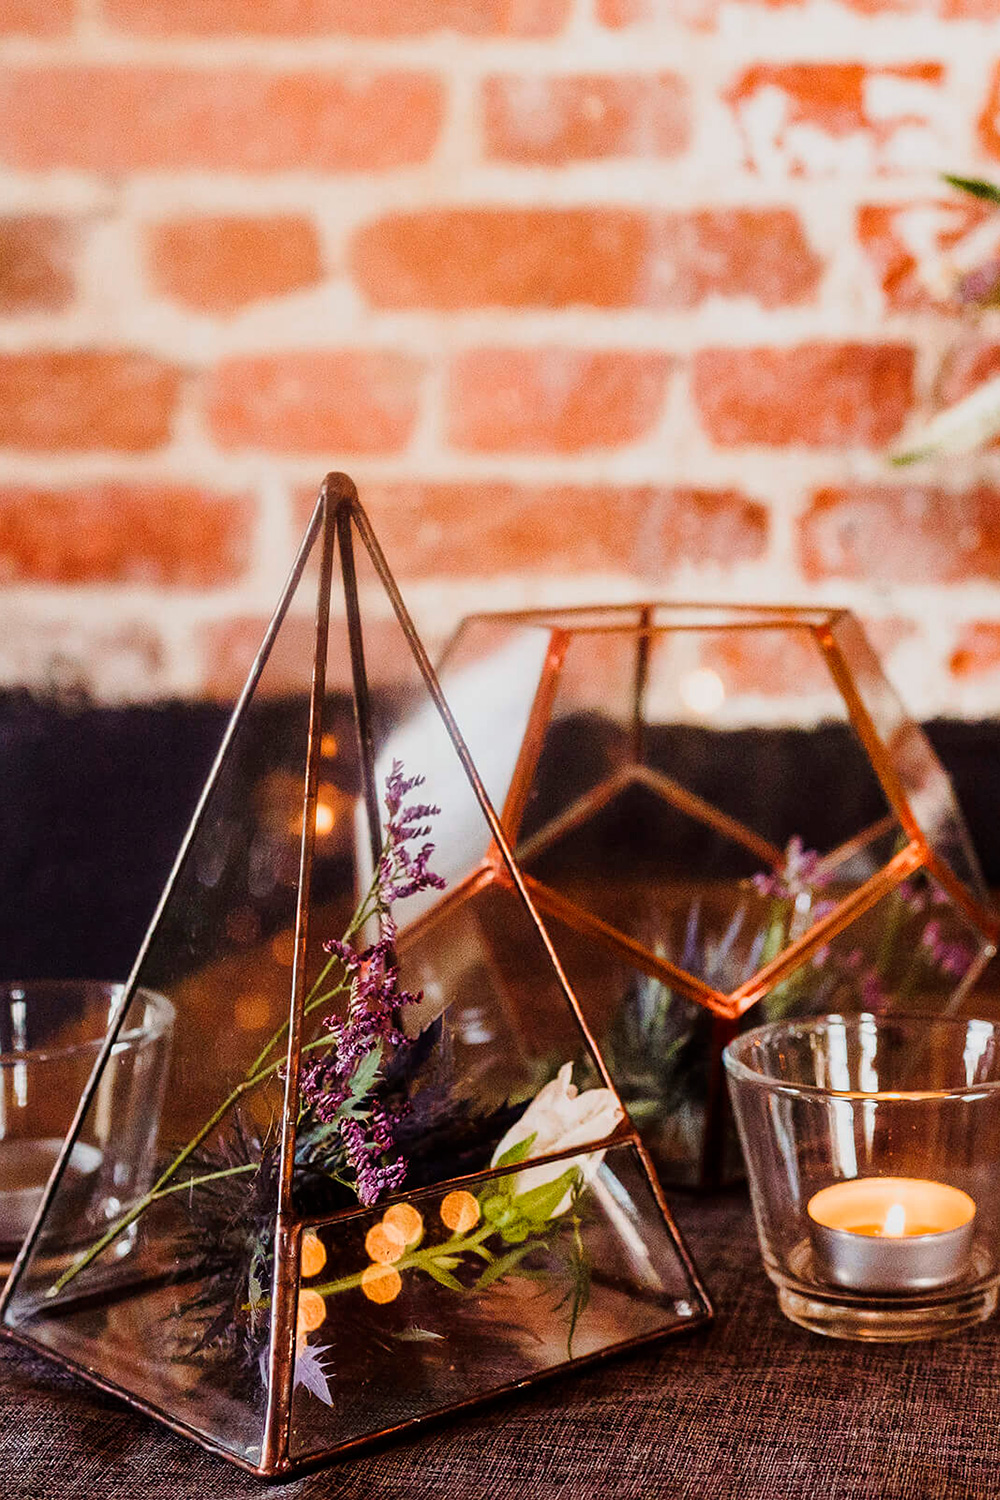 Lucy Simon Rustic Quirky Wedding Rob Dodsworth Photography SBS 021